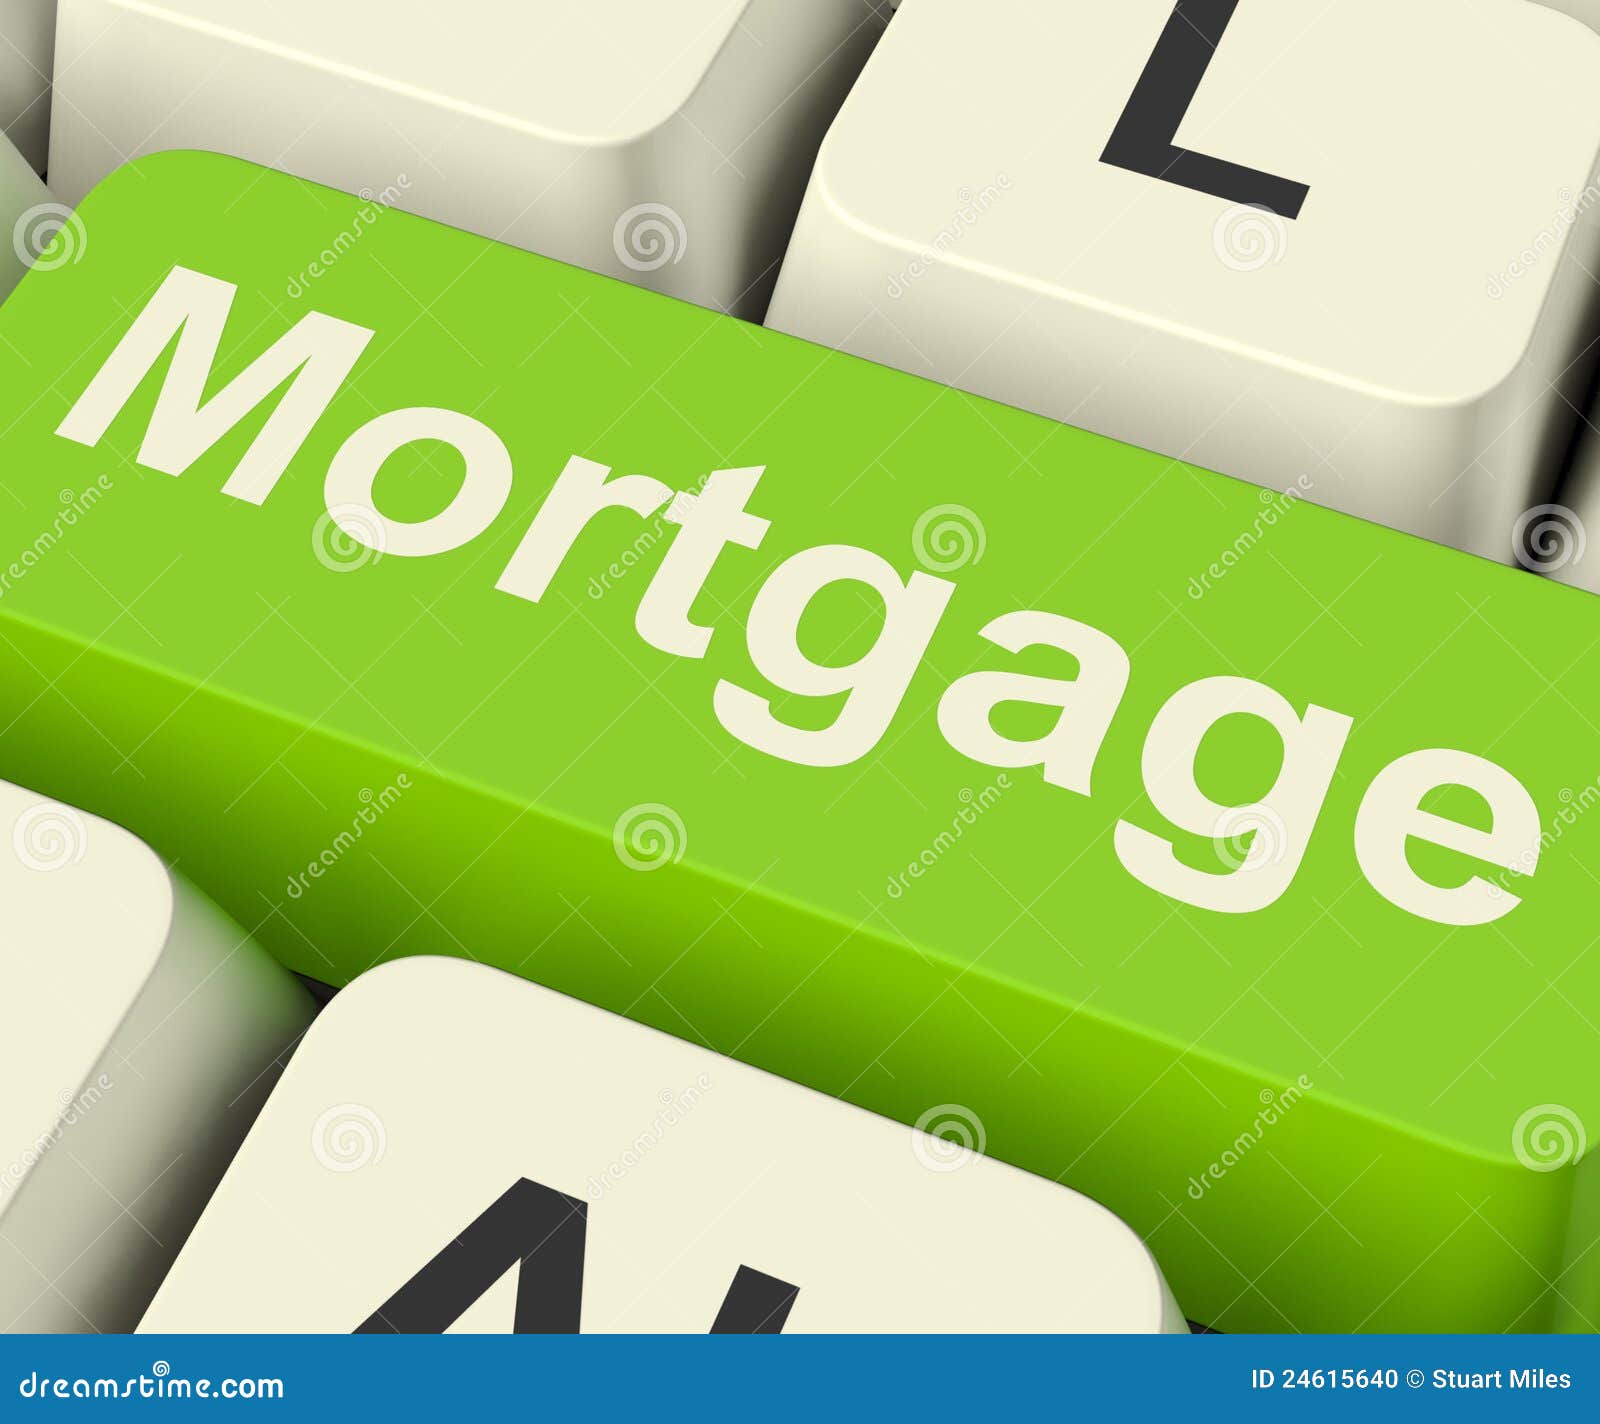 mortgage computer key showing online credit or borrowing